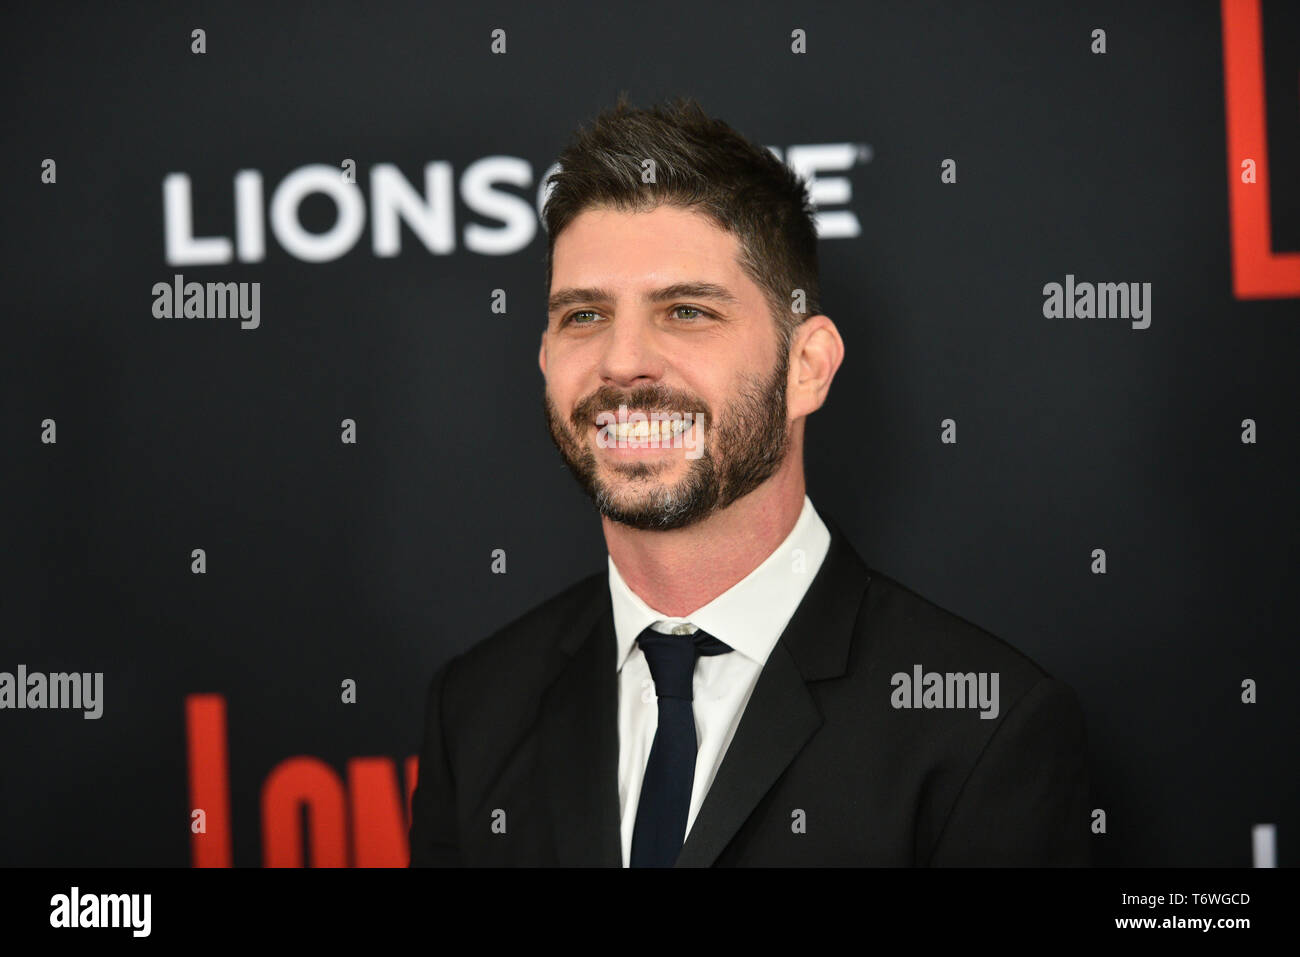 Jonathan besucht die Premiere von "Long Shot" bei AMC Lincoln Square Theater am 30. April 2019 in New York City. Stockfoto